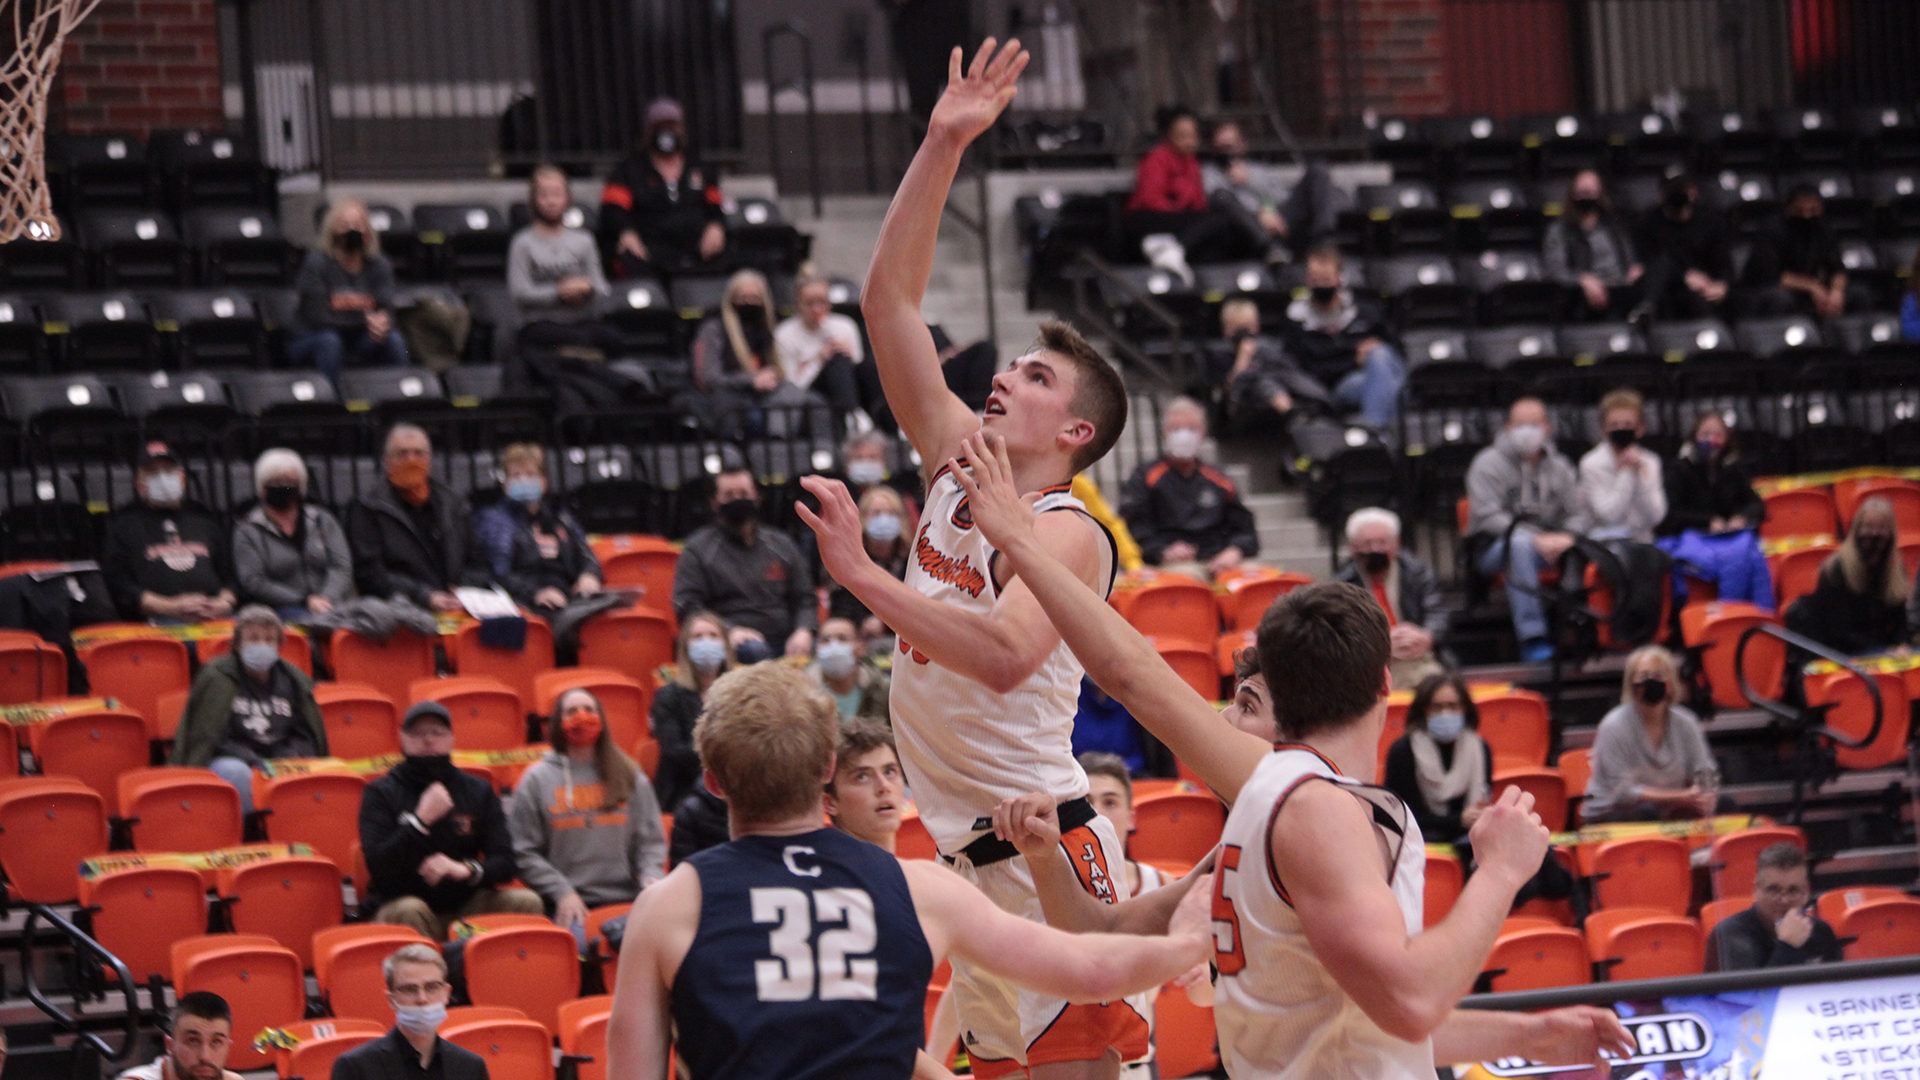 Bulldogs pull away in second half to defeat Jimmies